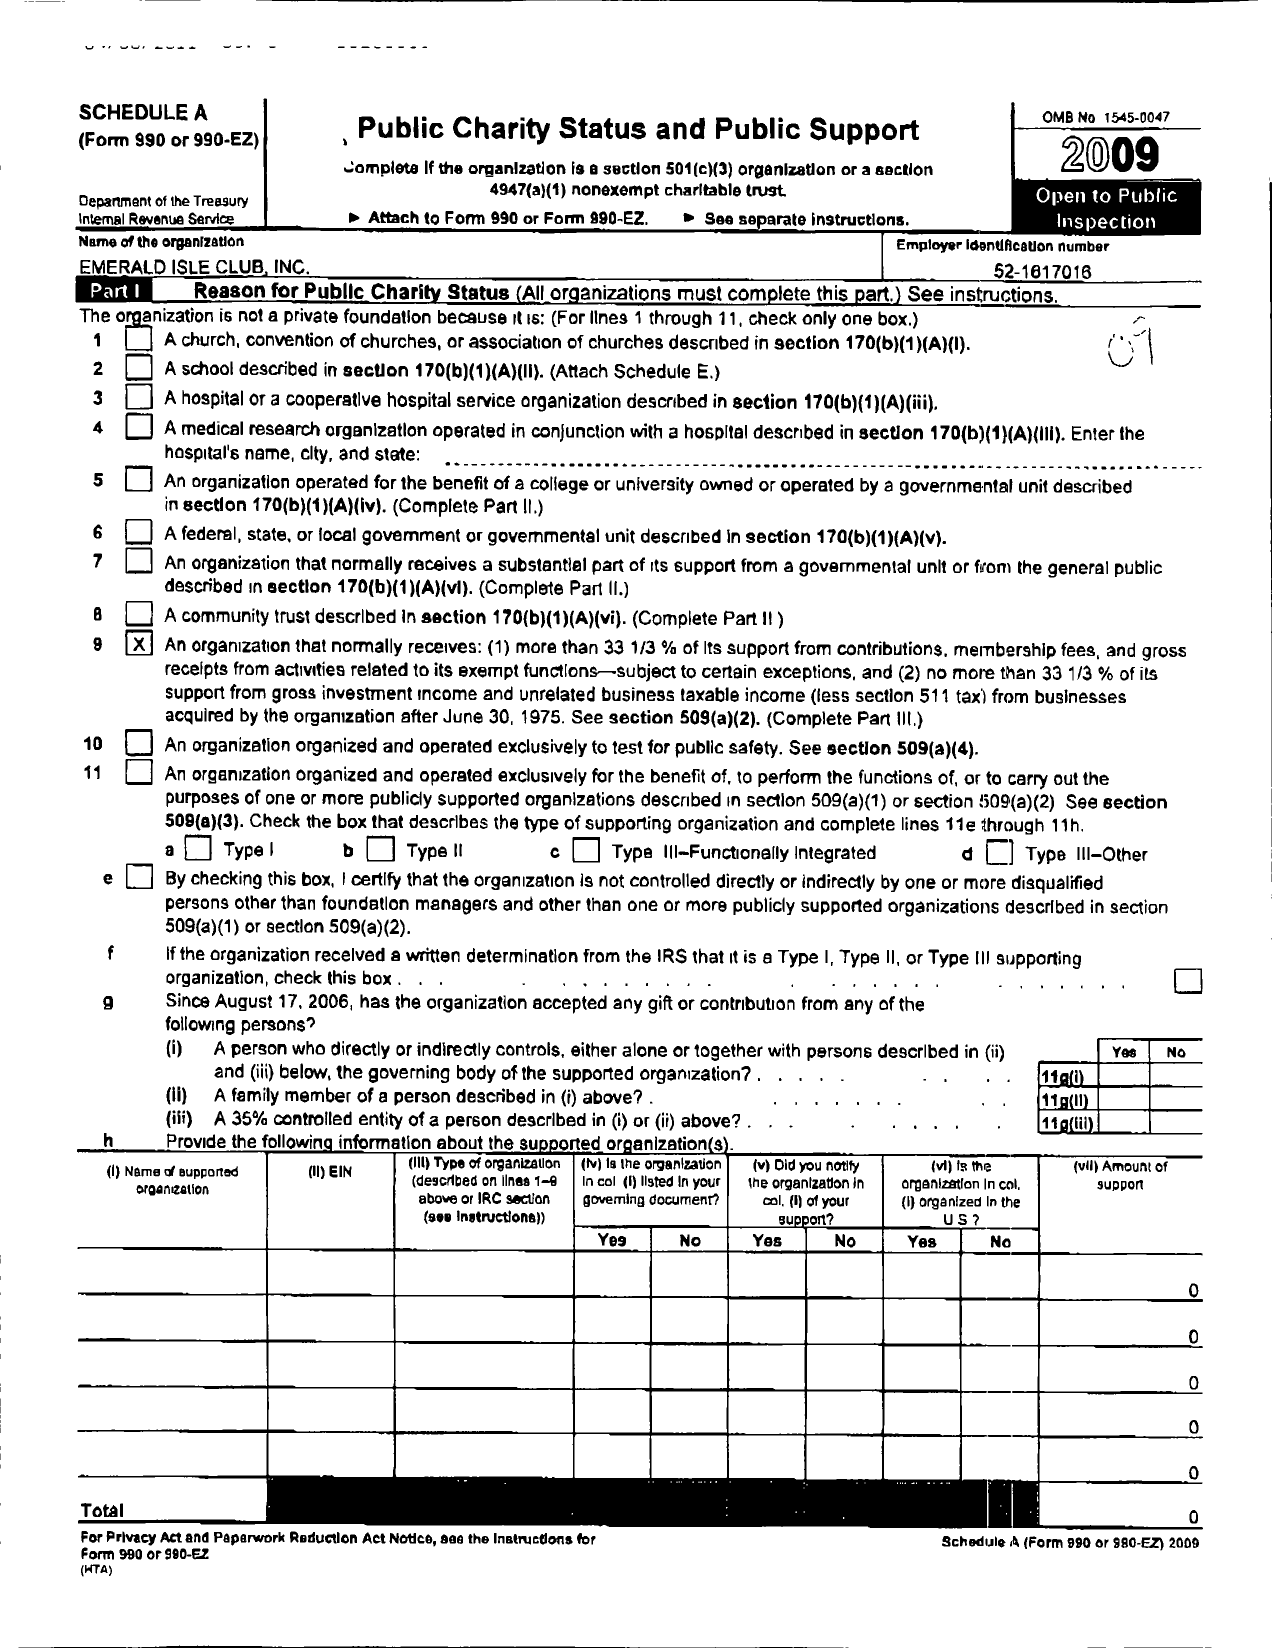 Image of first page of 2009 Form 990ER for Emerald Isle Club